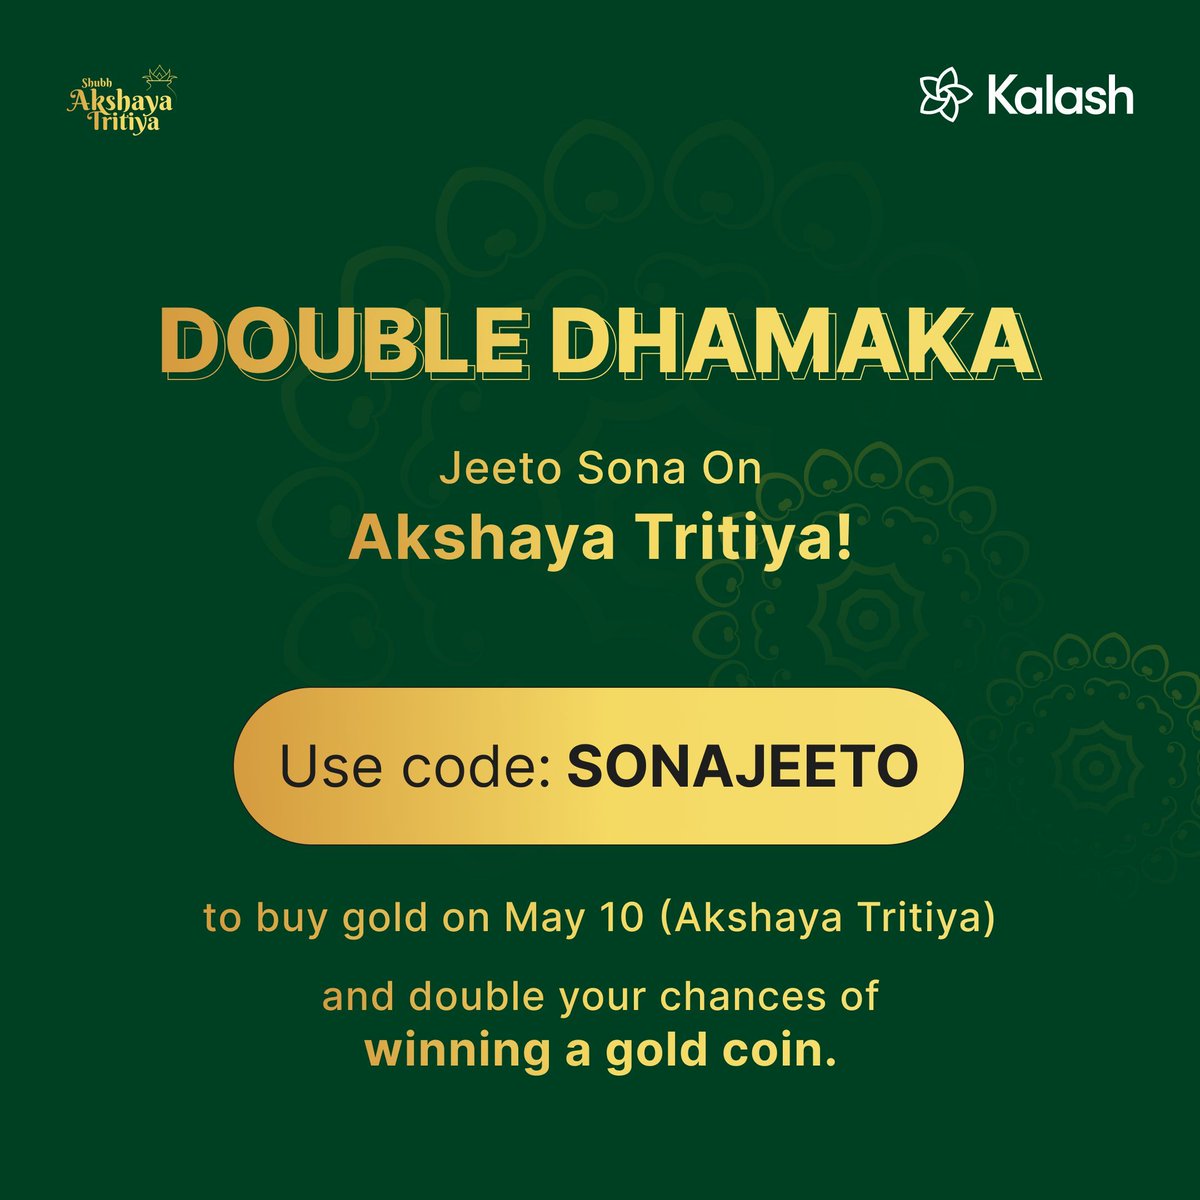 Luck will favour you twice on Akshaya Tritiya! Buy gold on Akshaya Tritiya, i.e. May 10th, and double your odds of winning a gold coin. Get the app here: buff.ly/3wgK85m